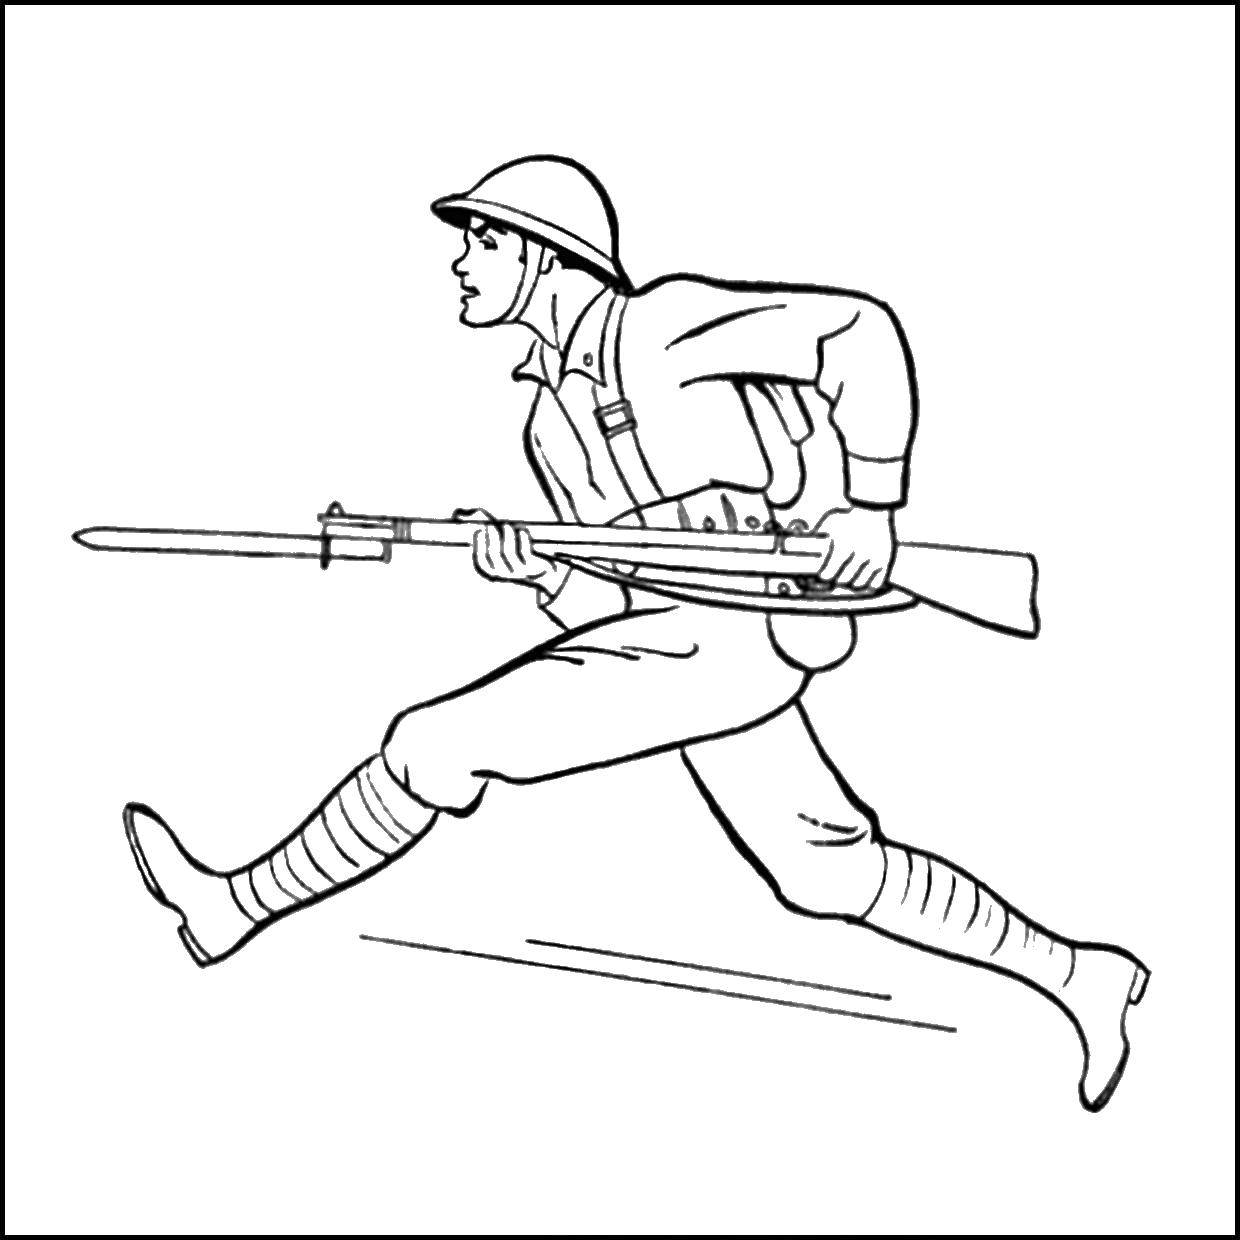 Coloring Soldiers with weapons. Category military. Tags:  military, soldiers, weapons.